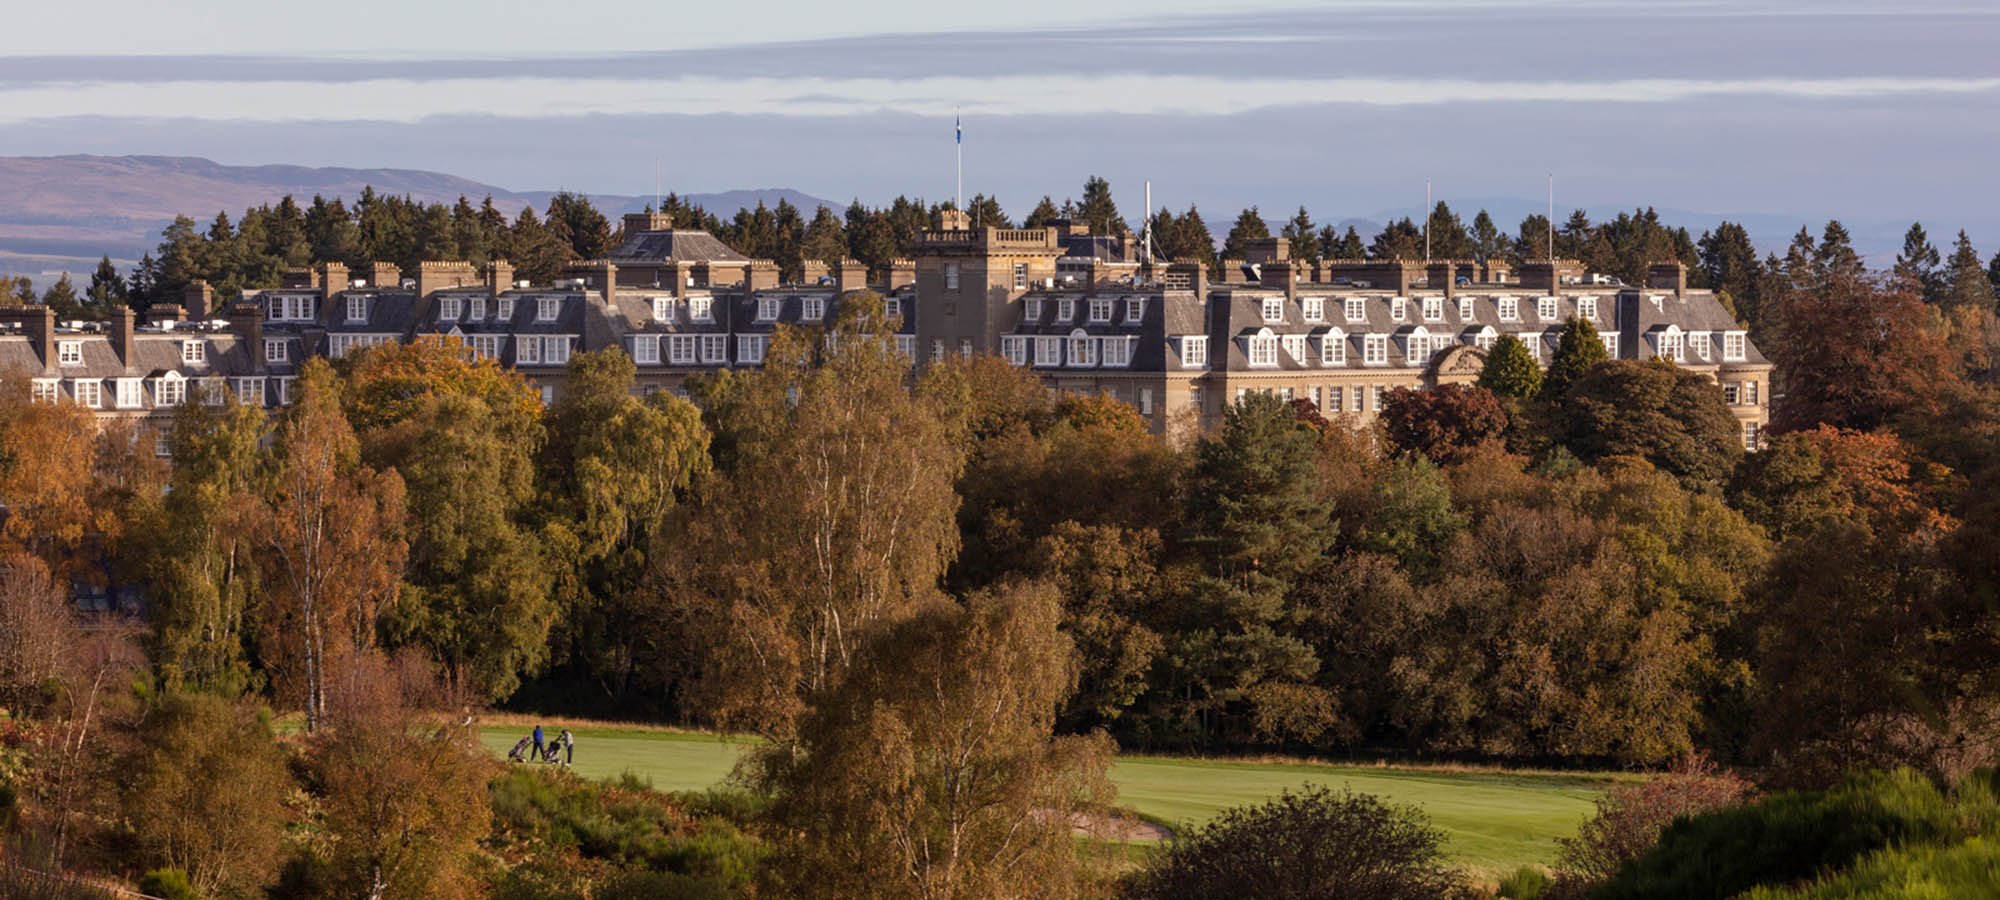 Gleneagles hotel in the autumn with hills in the background